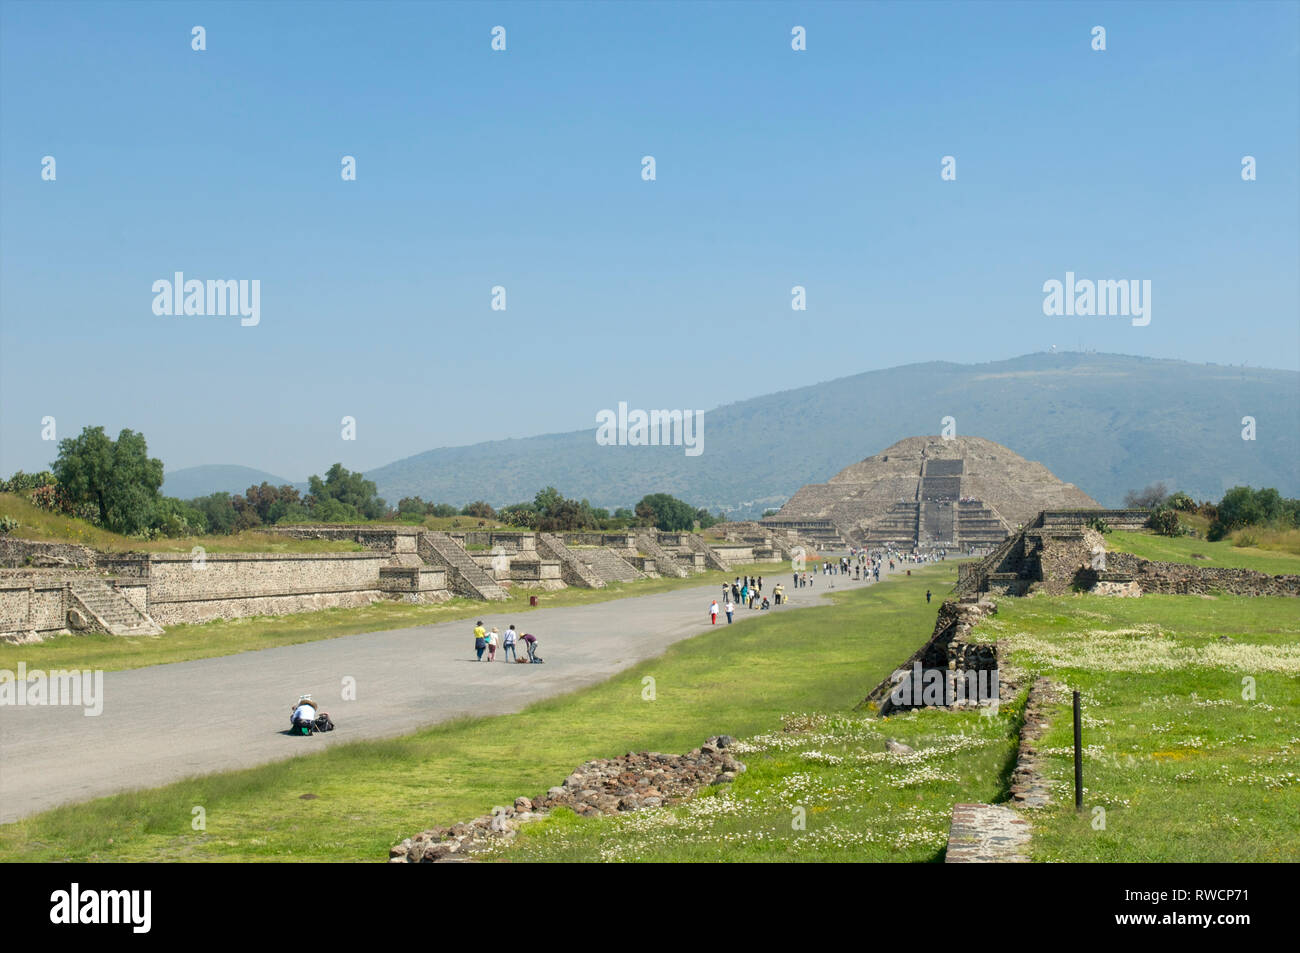 Tourists walking on Avenue of the Dead and the view of Pyramid of the Moon at Teotihuacan, Mexico Stock Photo